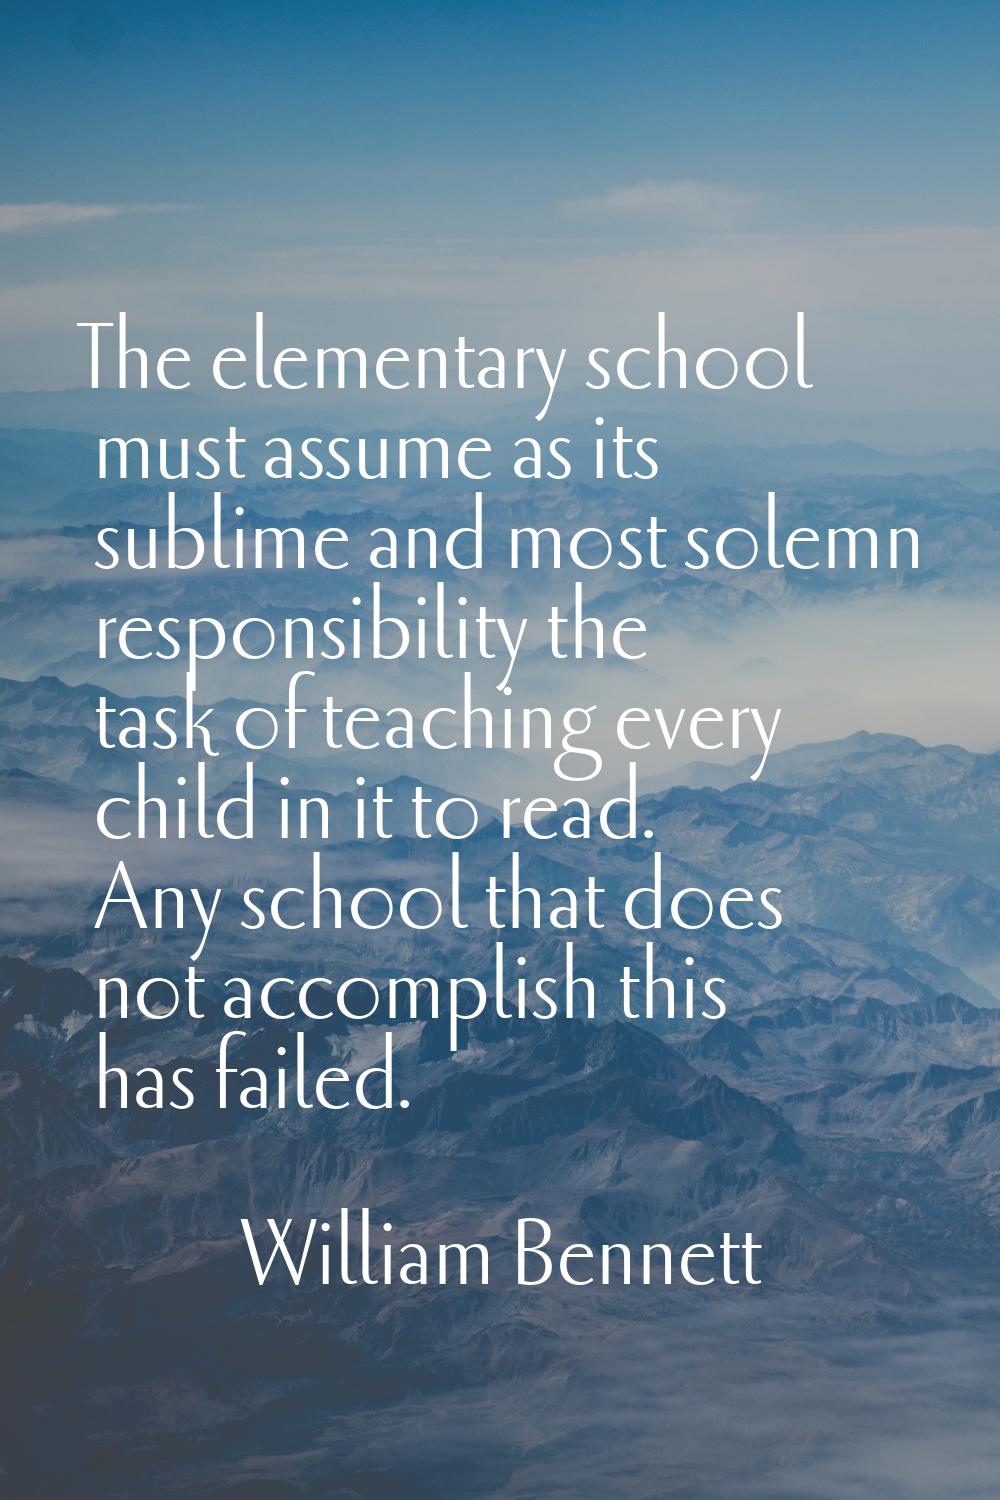 The elementary school must assume as its sublime and most solemn responsibility the task of teachin